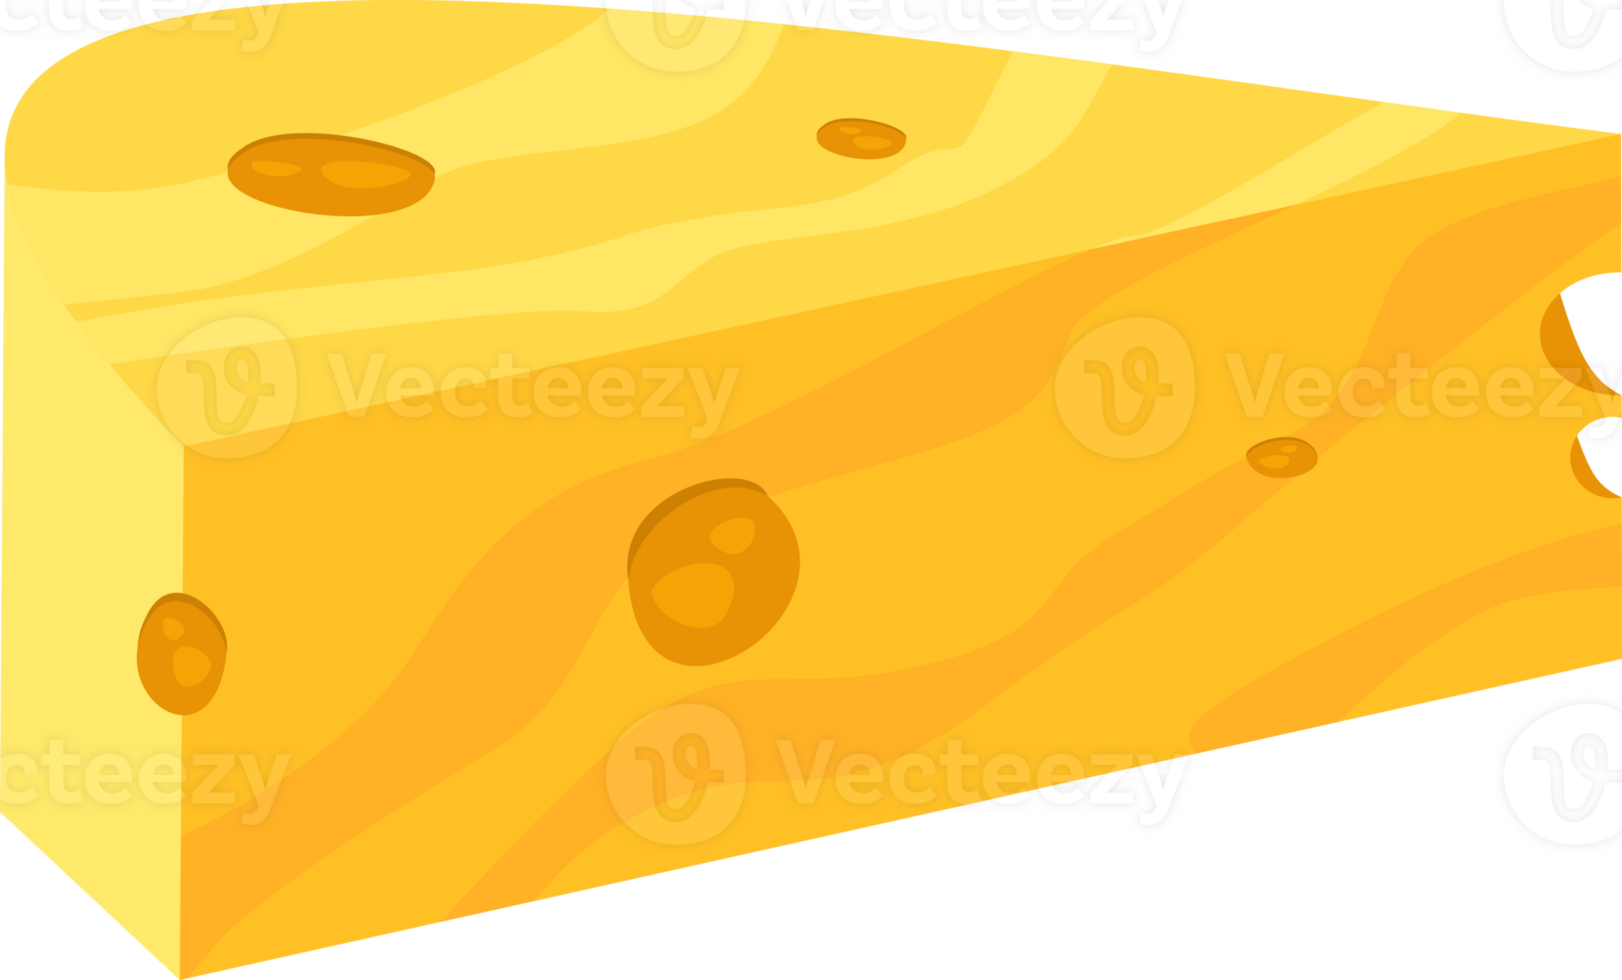 Cheese Exclusive and Premium Element png